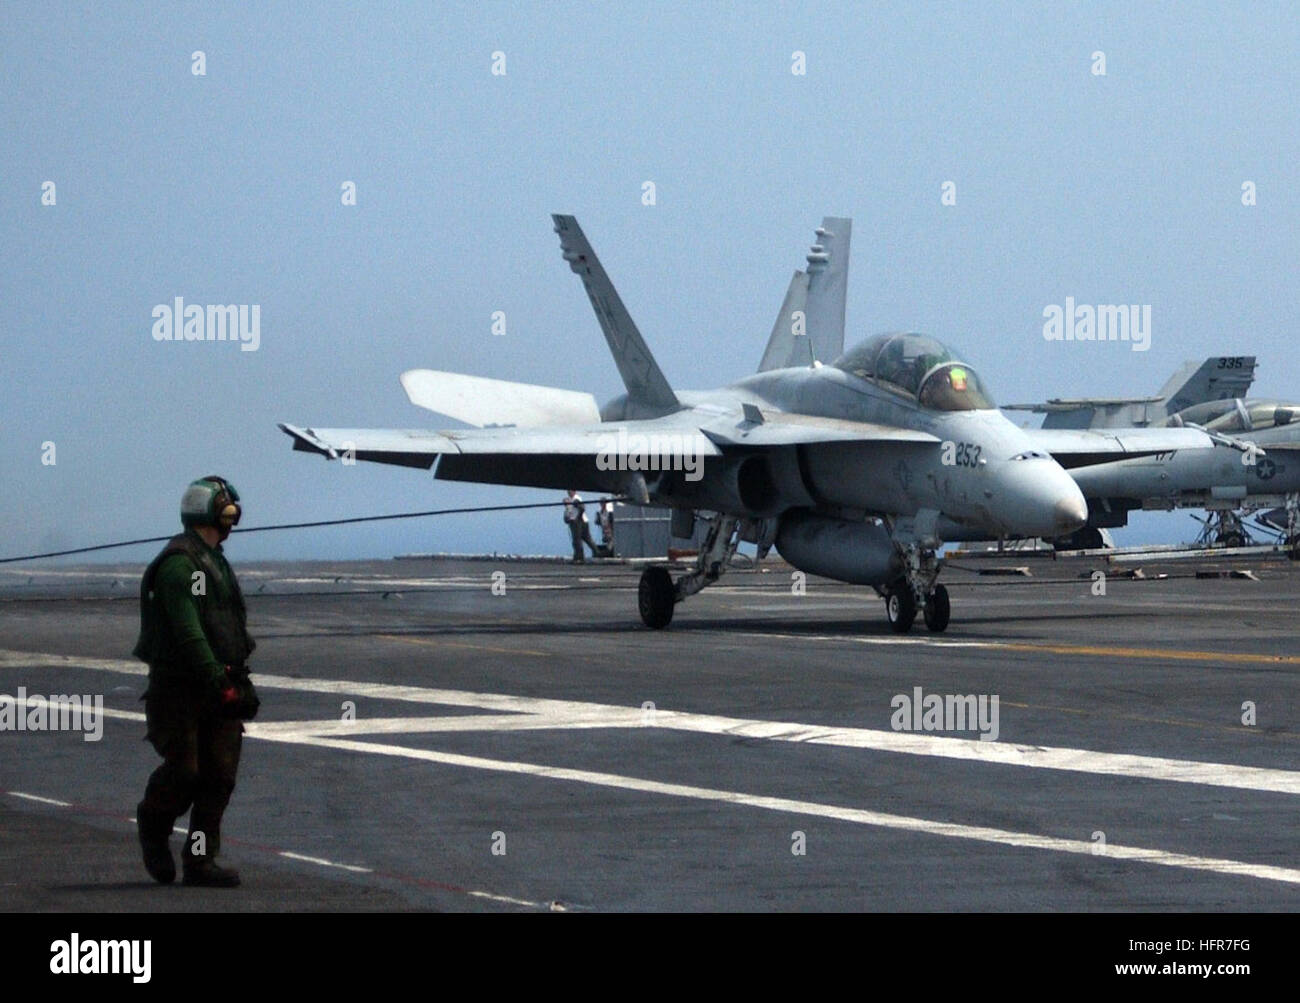 060608-N-1121F-009 June 8, 2006 Aboard USS Theodore Roosevelt (CVN-71)  A F/A-18 catches the wire after landing while conducting flight operations underway. U.S. Navy Photo by Photographer's Mate 3rd Class   Jacob Fadley US Navy 060608-N-1121F-009 An F-A-18C Hornet conducts an arrested landing aboard the Nimitz-class aircraft carrier USS Theodore Roosevelt (CVN 71) Stock Photo